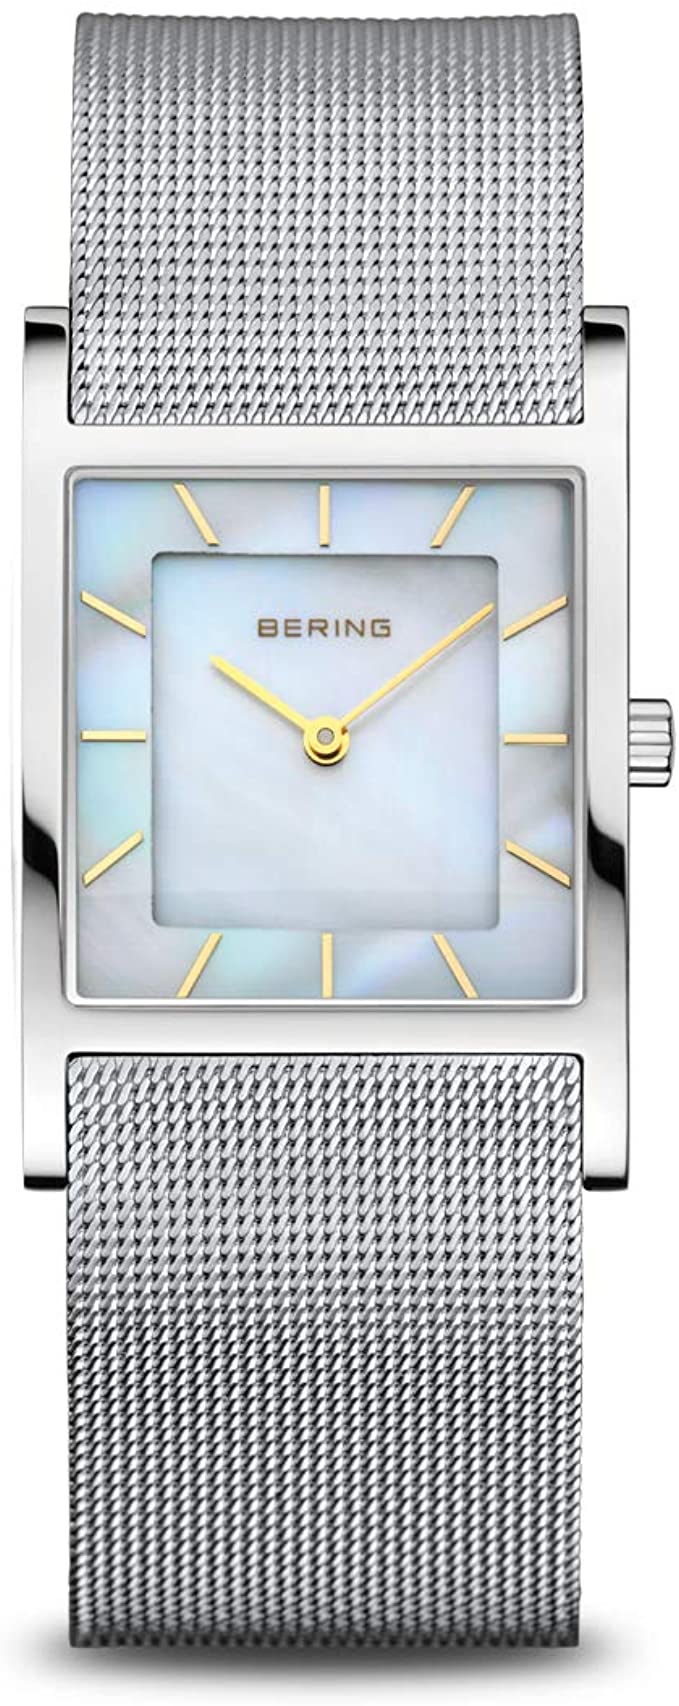 BERING Time | Women's Slim Watch 10426-010-S | 26MM Case | Classic Collection | Stainless Steel Strap | Scratch-Resistant Sapphire Crystal | Minimalistic - Designed in Denmark